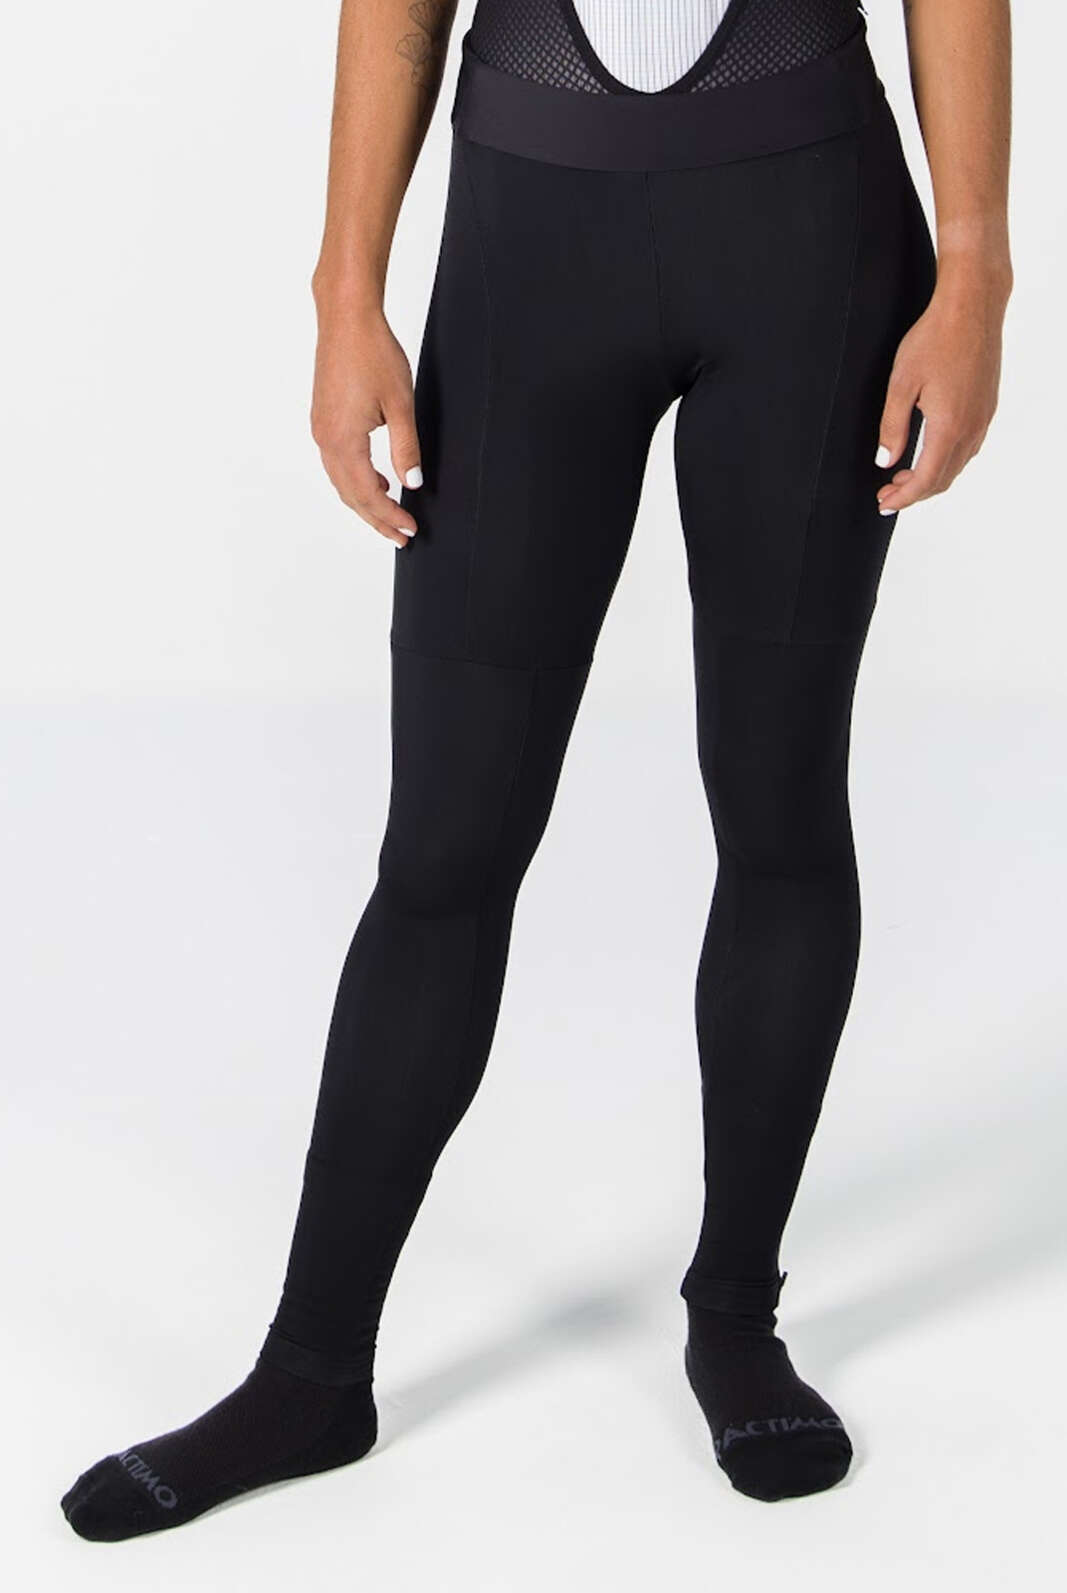 Women's Thermal Cycling Tights, Cool & Cold Weather